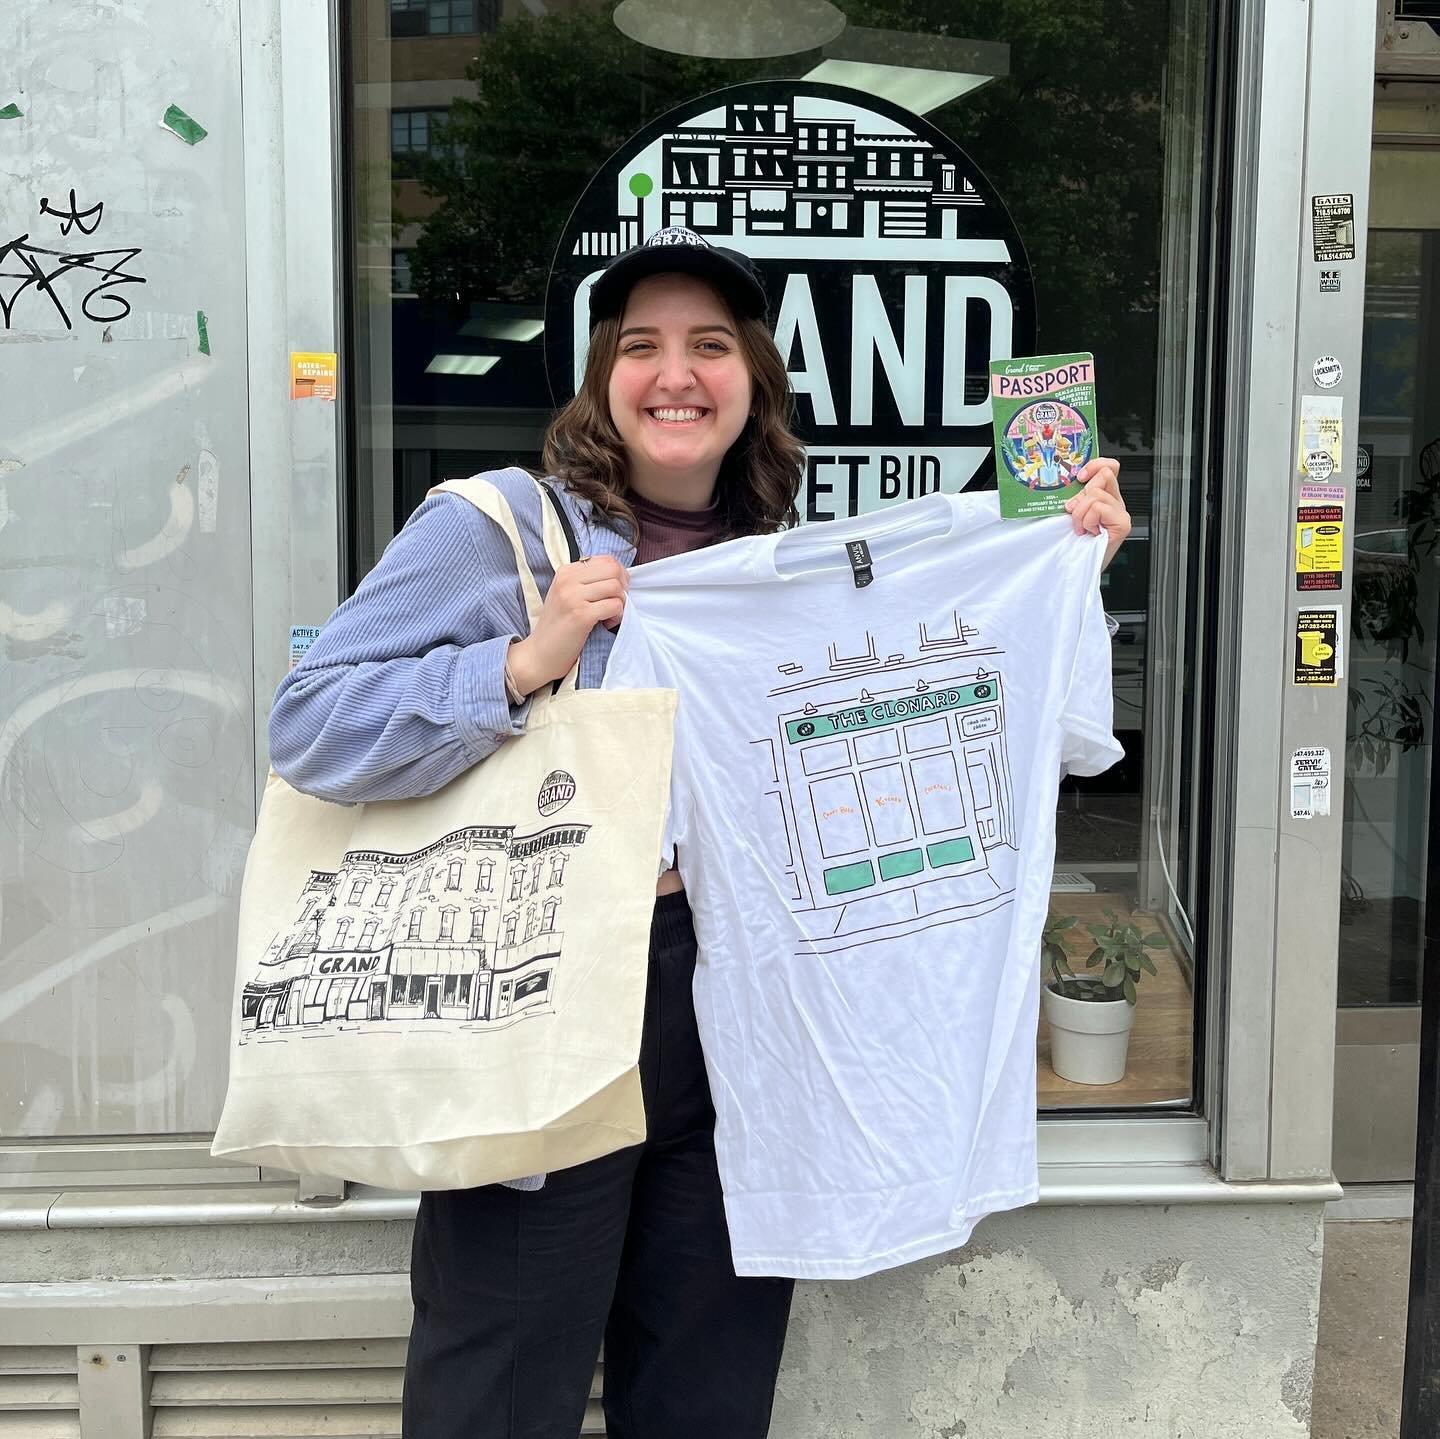 Congratulations to @abi.milner on getting all 22 stamps in the Grand Street Passport! Abi visited every restaurant, eatery, and bar in the passport book; a mix of spots they had already loved and new favorites! Abi won merch from @theclonardbar , @cr